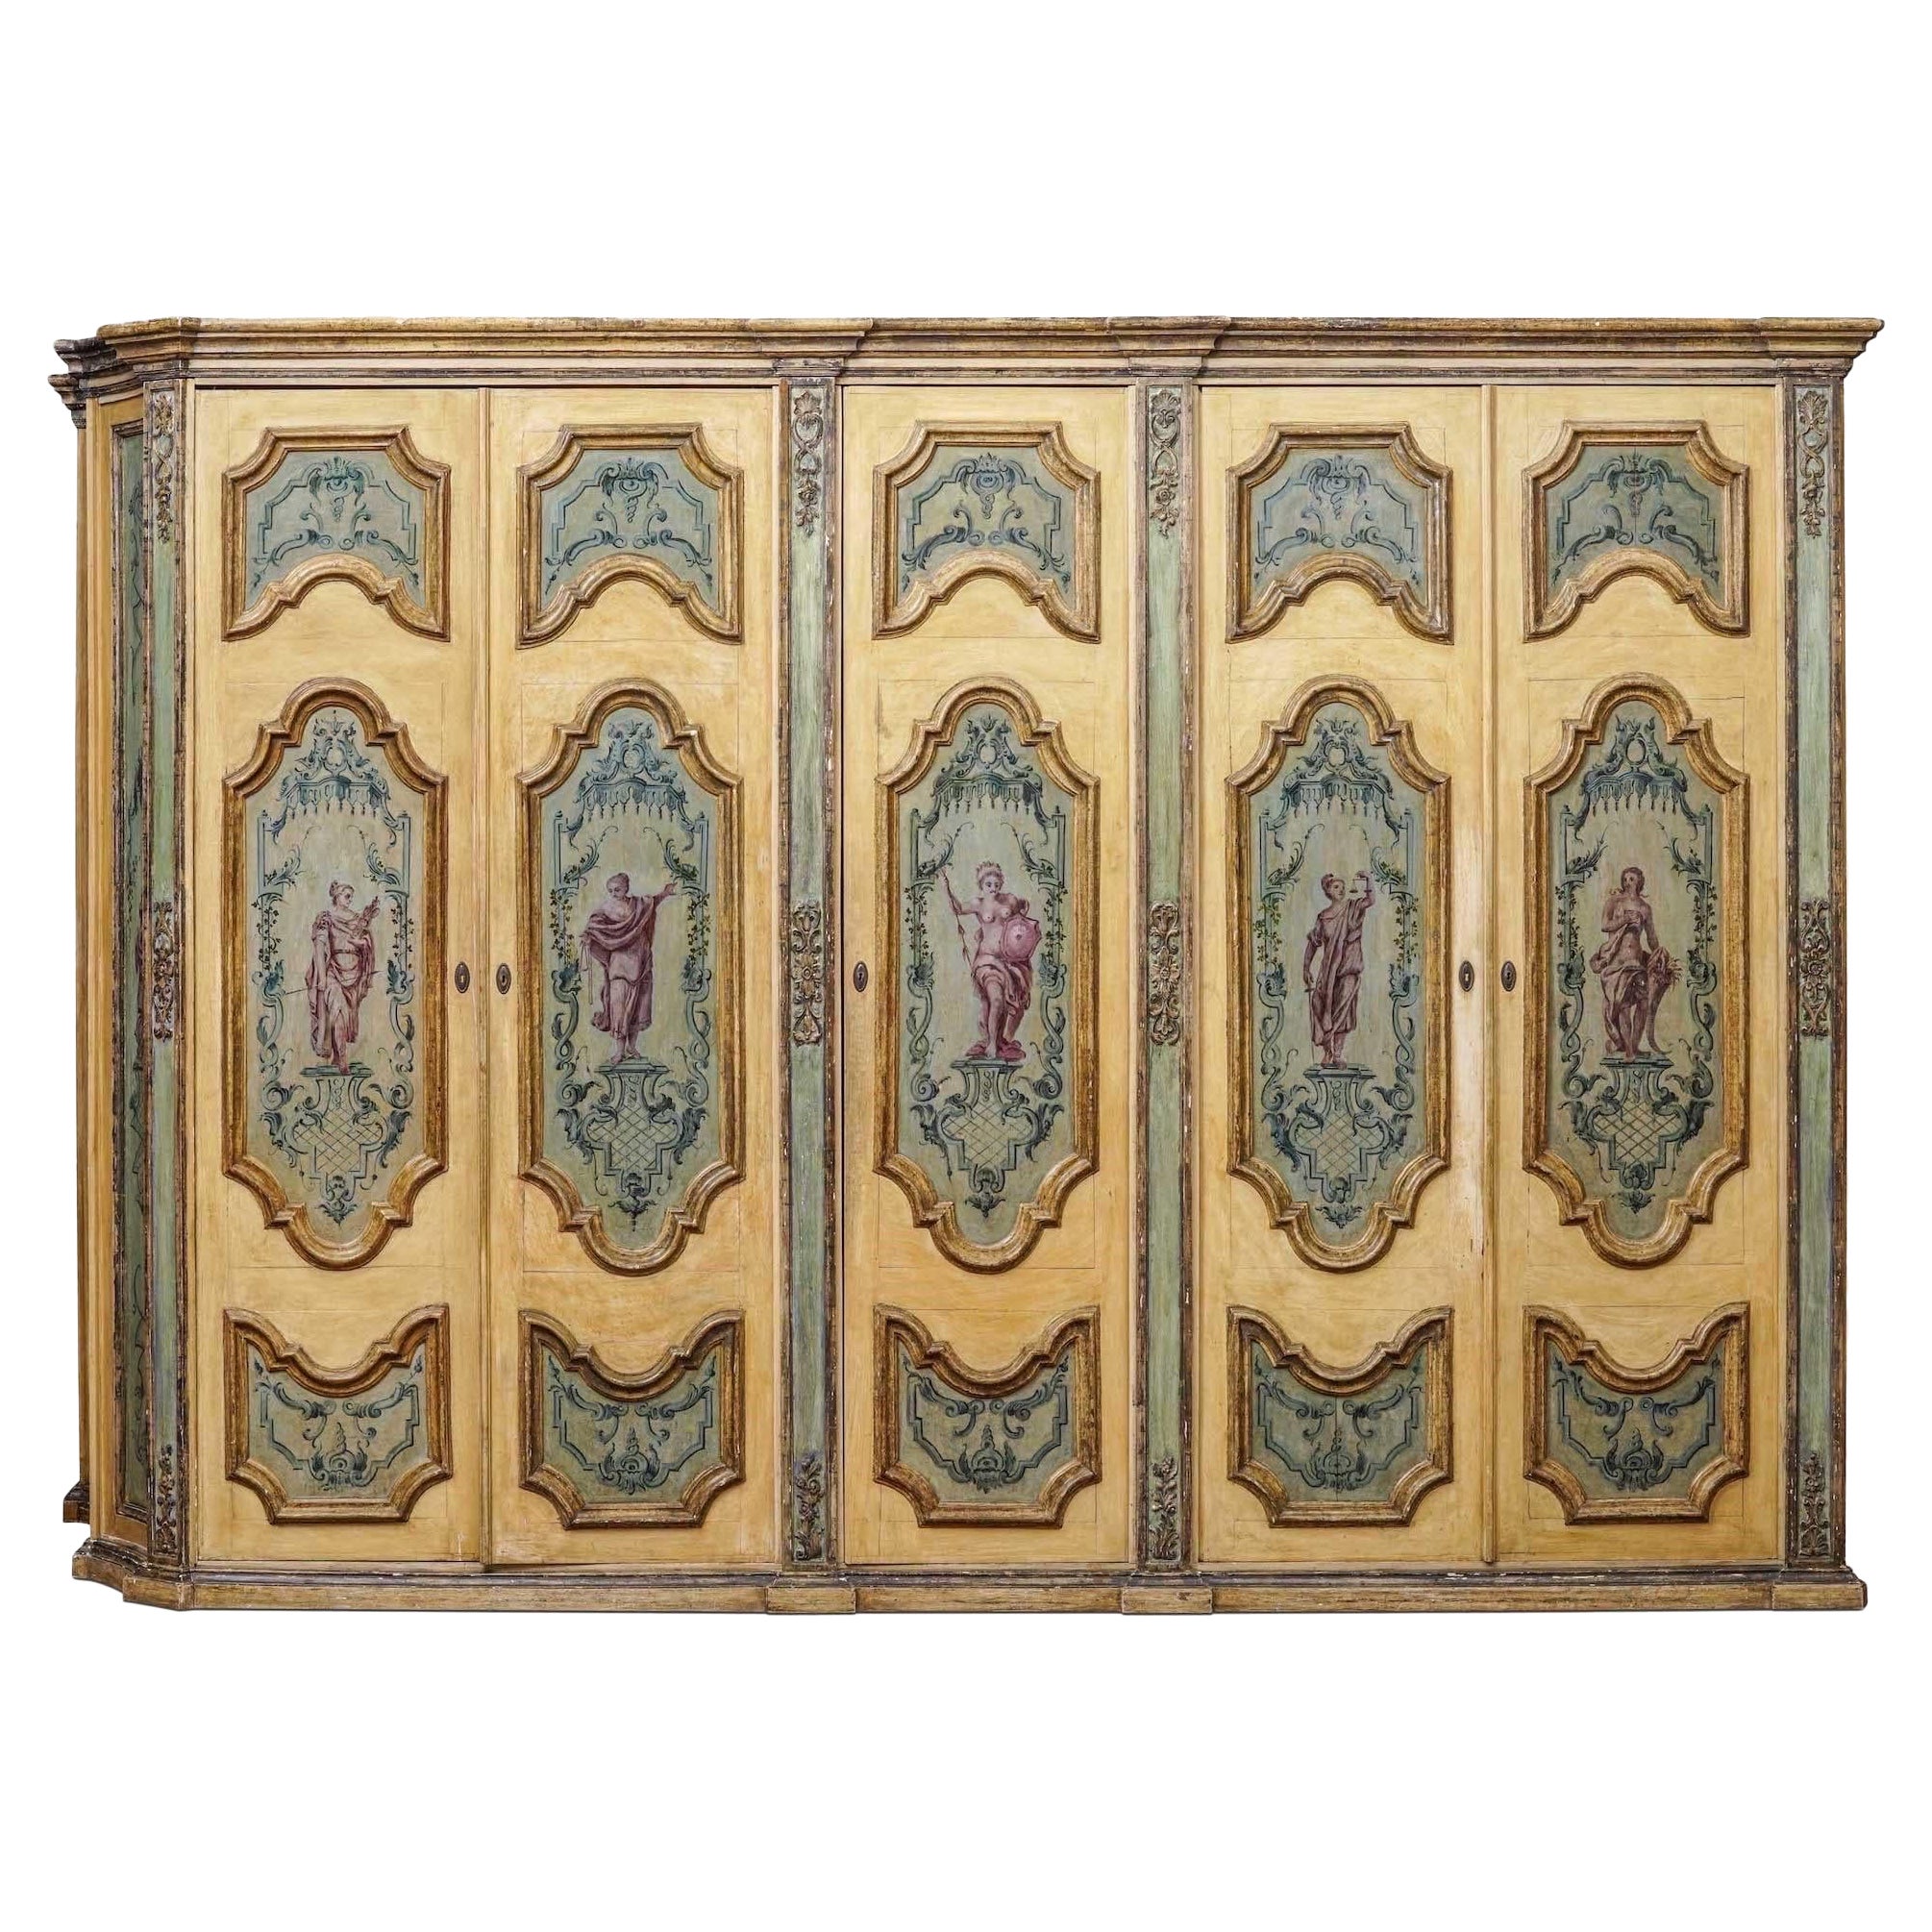 18th Century Neapolitan Armoire, carved and gilded framing neoclassical figures 